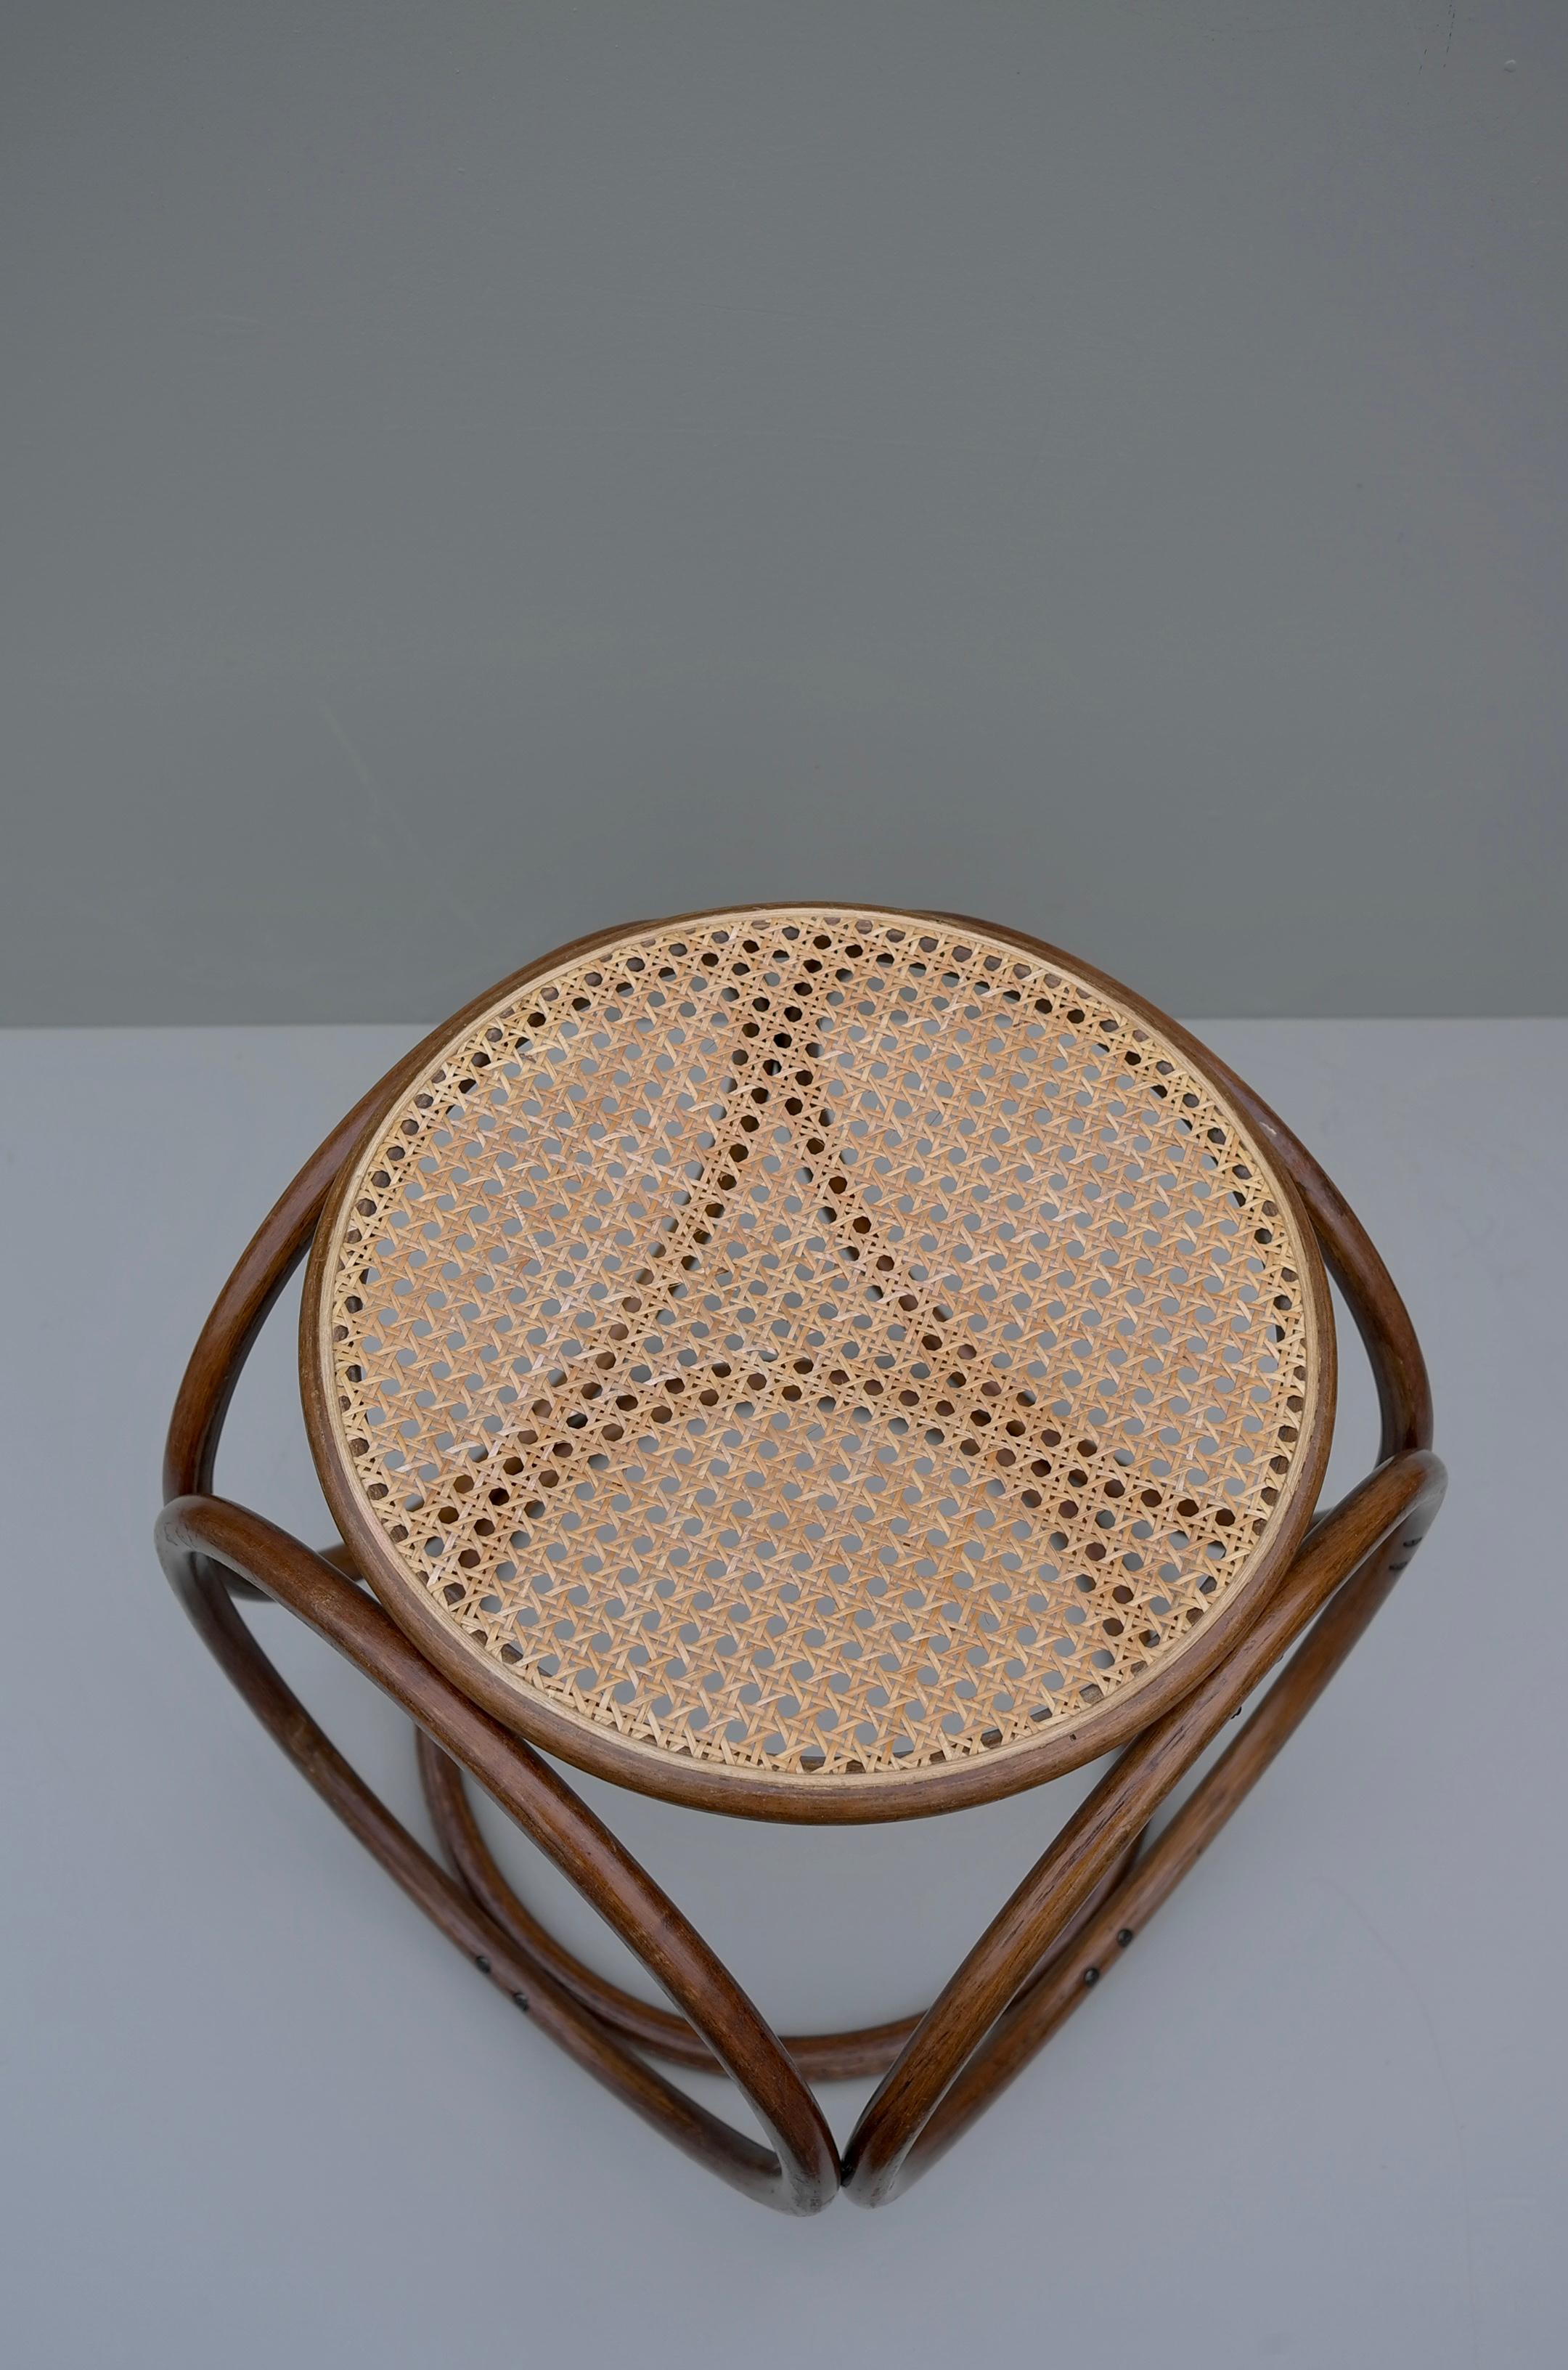 Stool side table in cane and bentwood, Austria, 1960s.